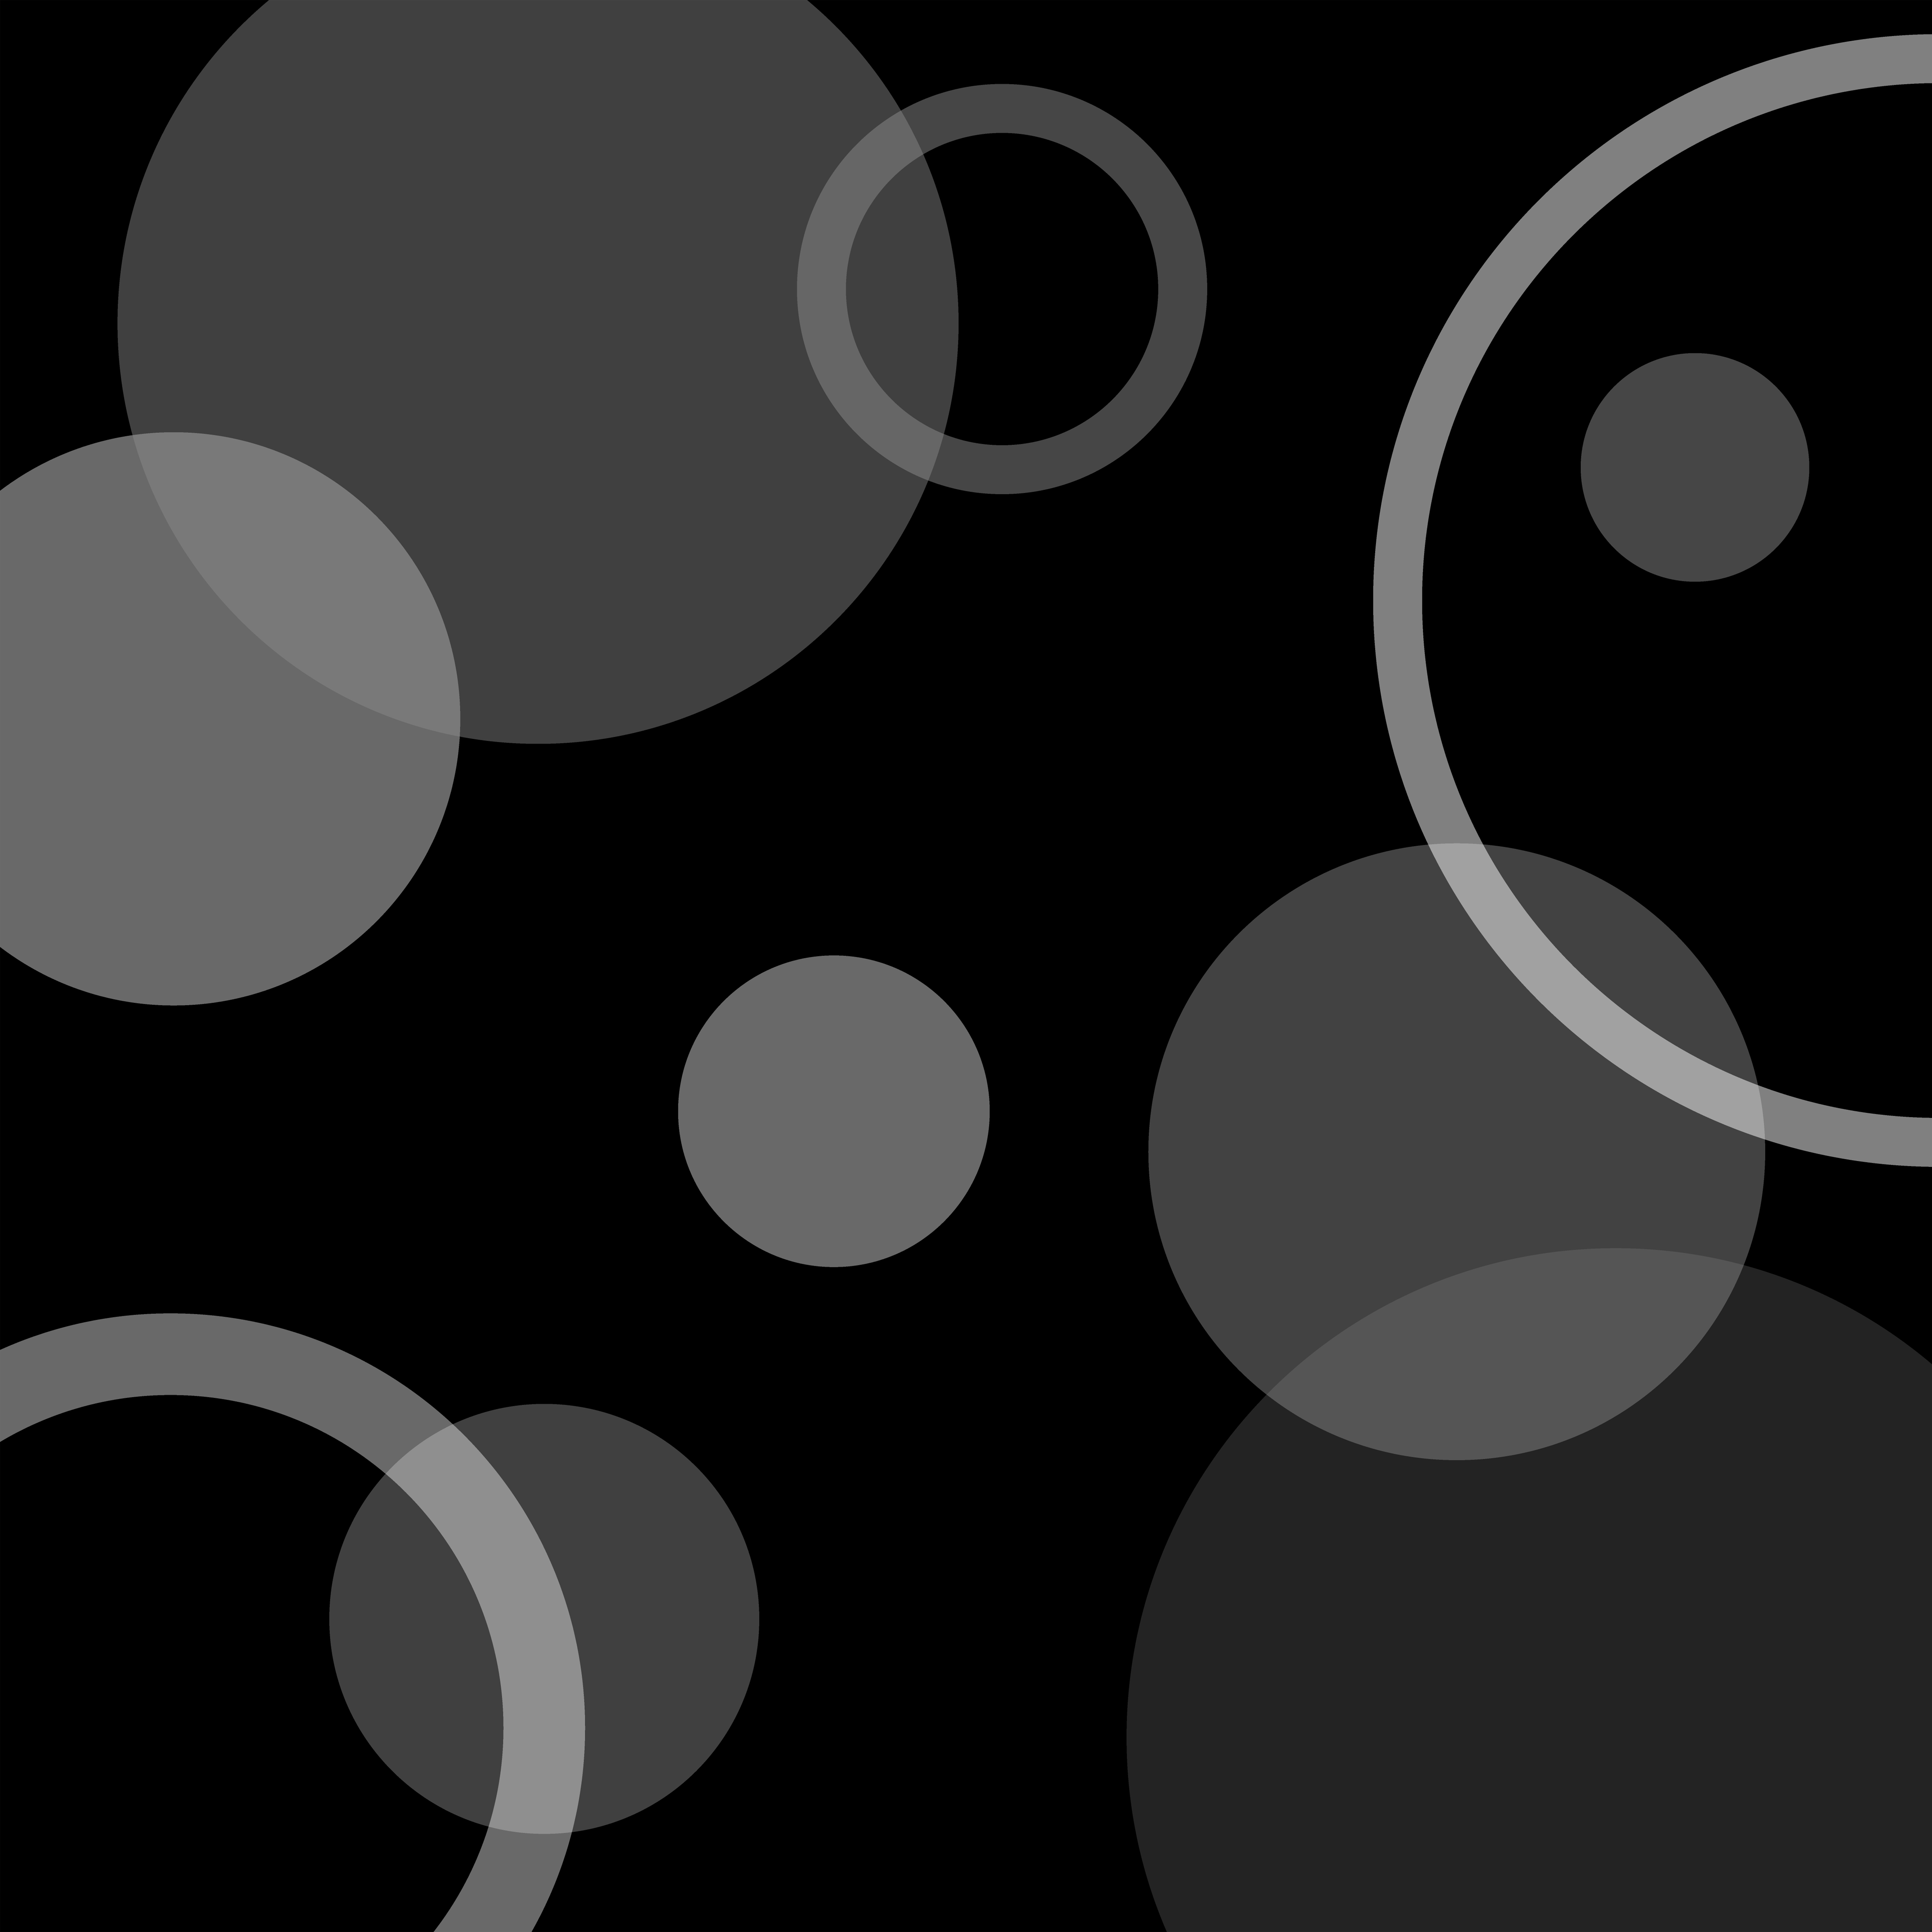 Black and White Circles Background   Free Clip Art